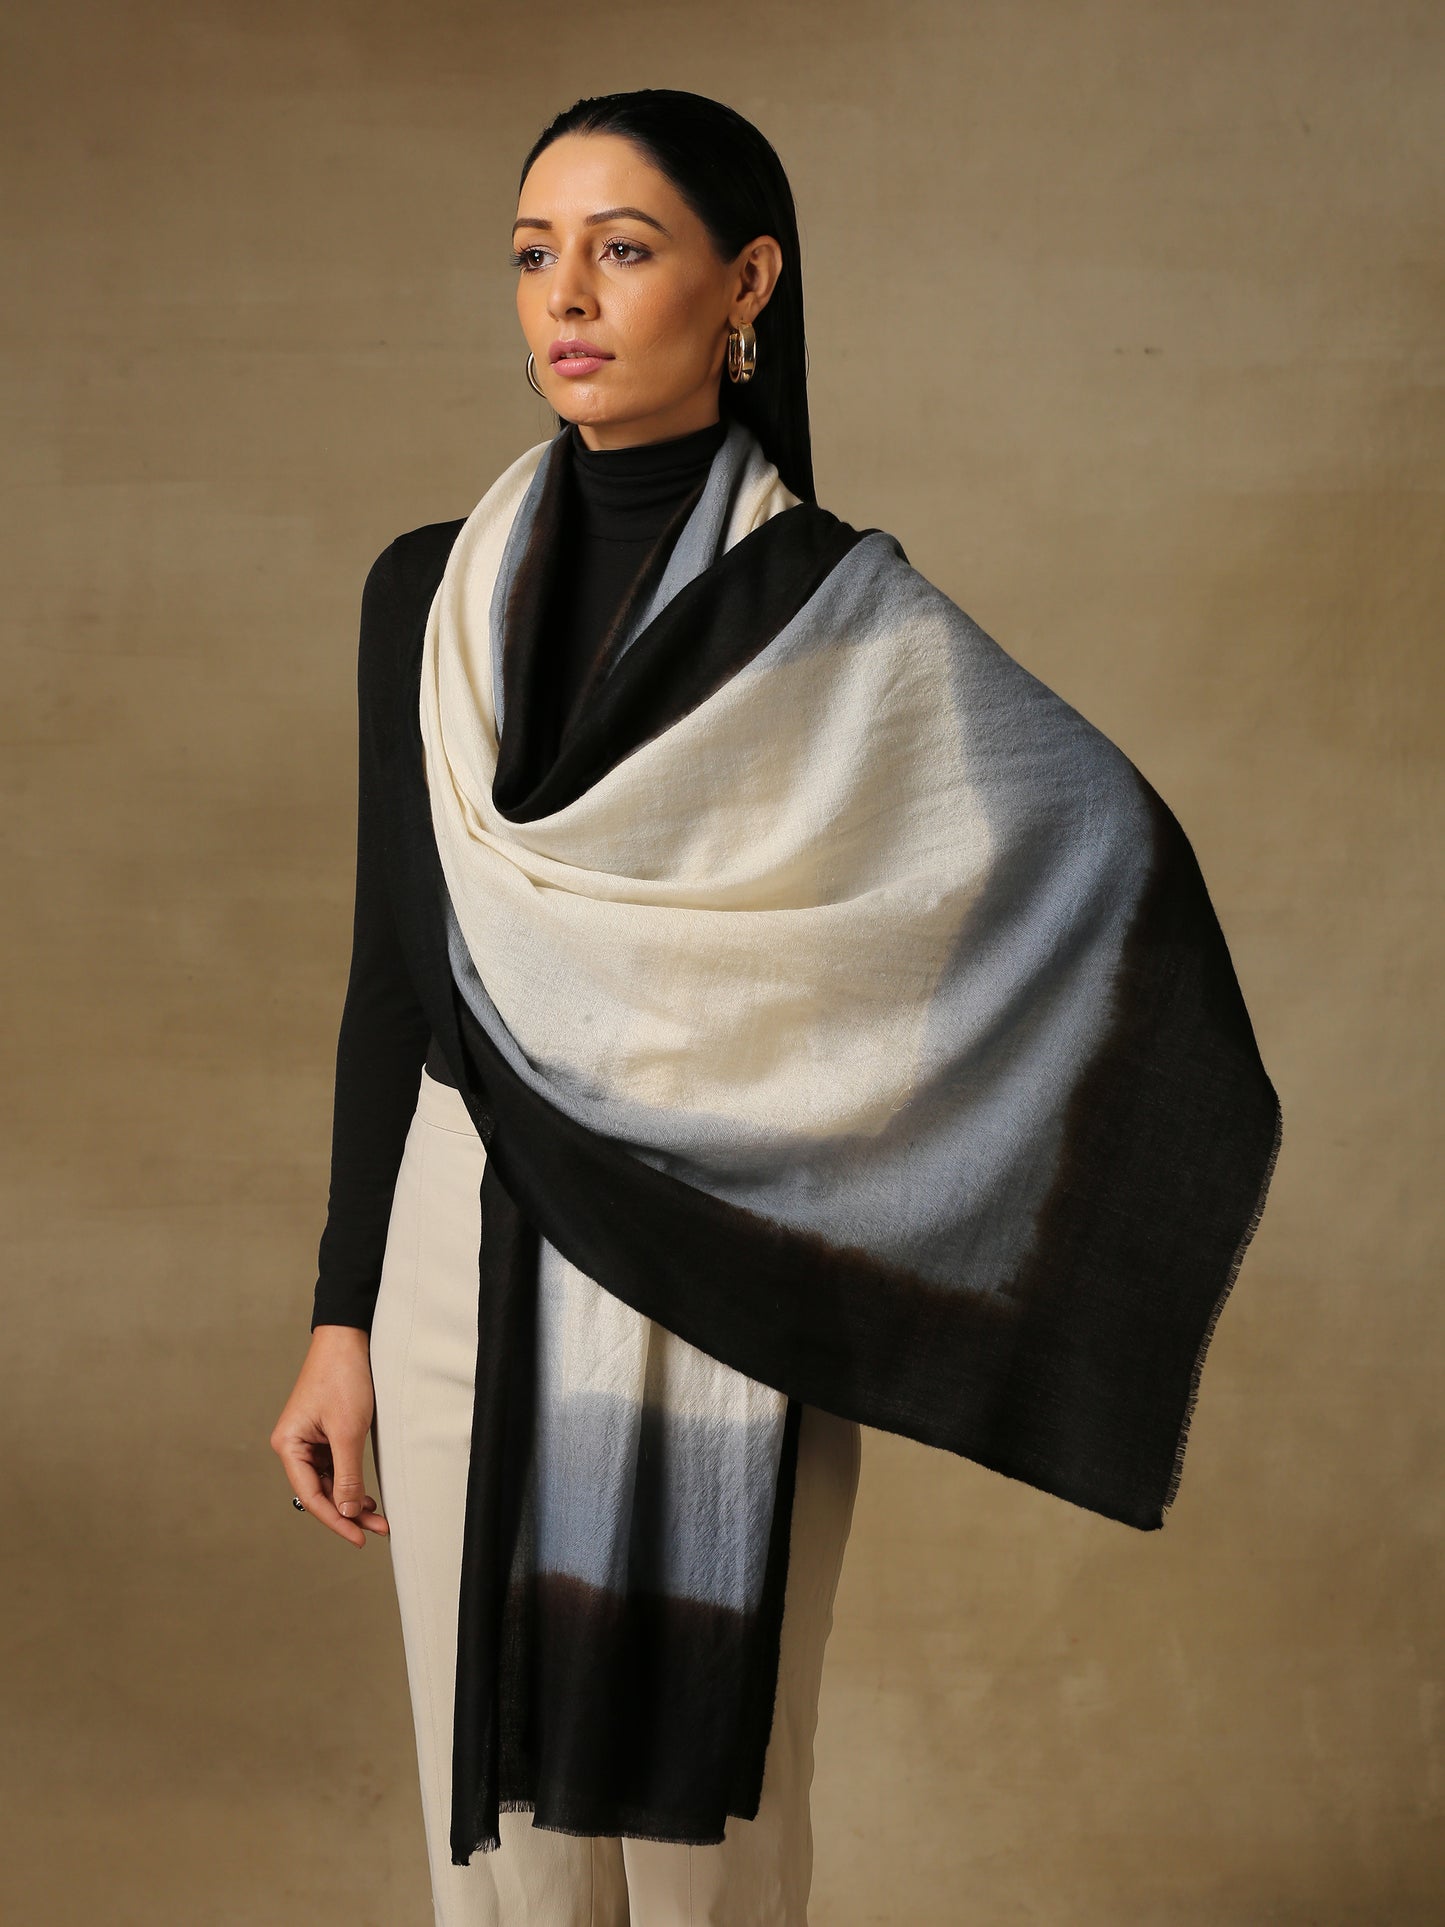 Model is wearing a Saya Ombre stole from Shaza, in the colour caves : White, gray and black